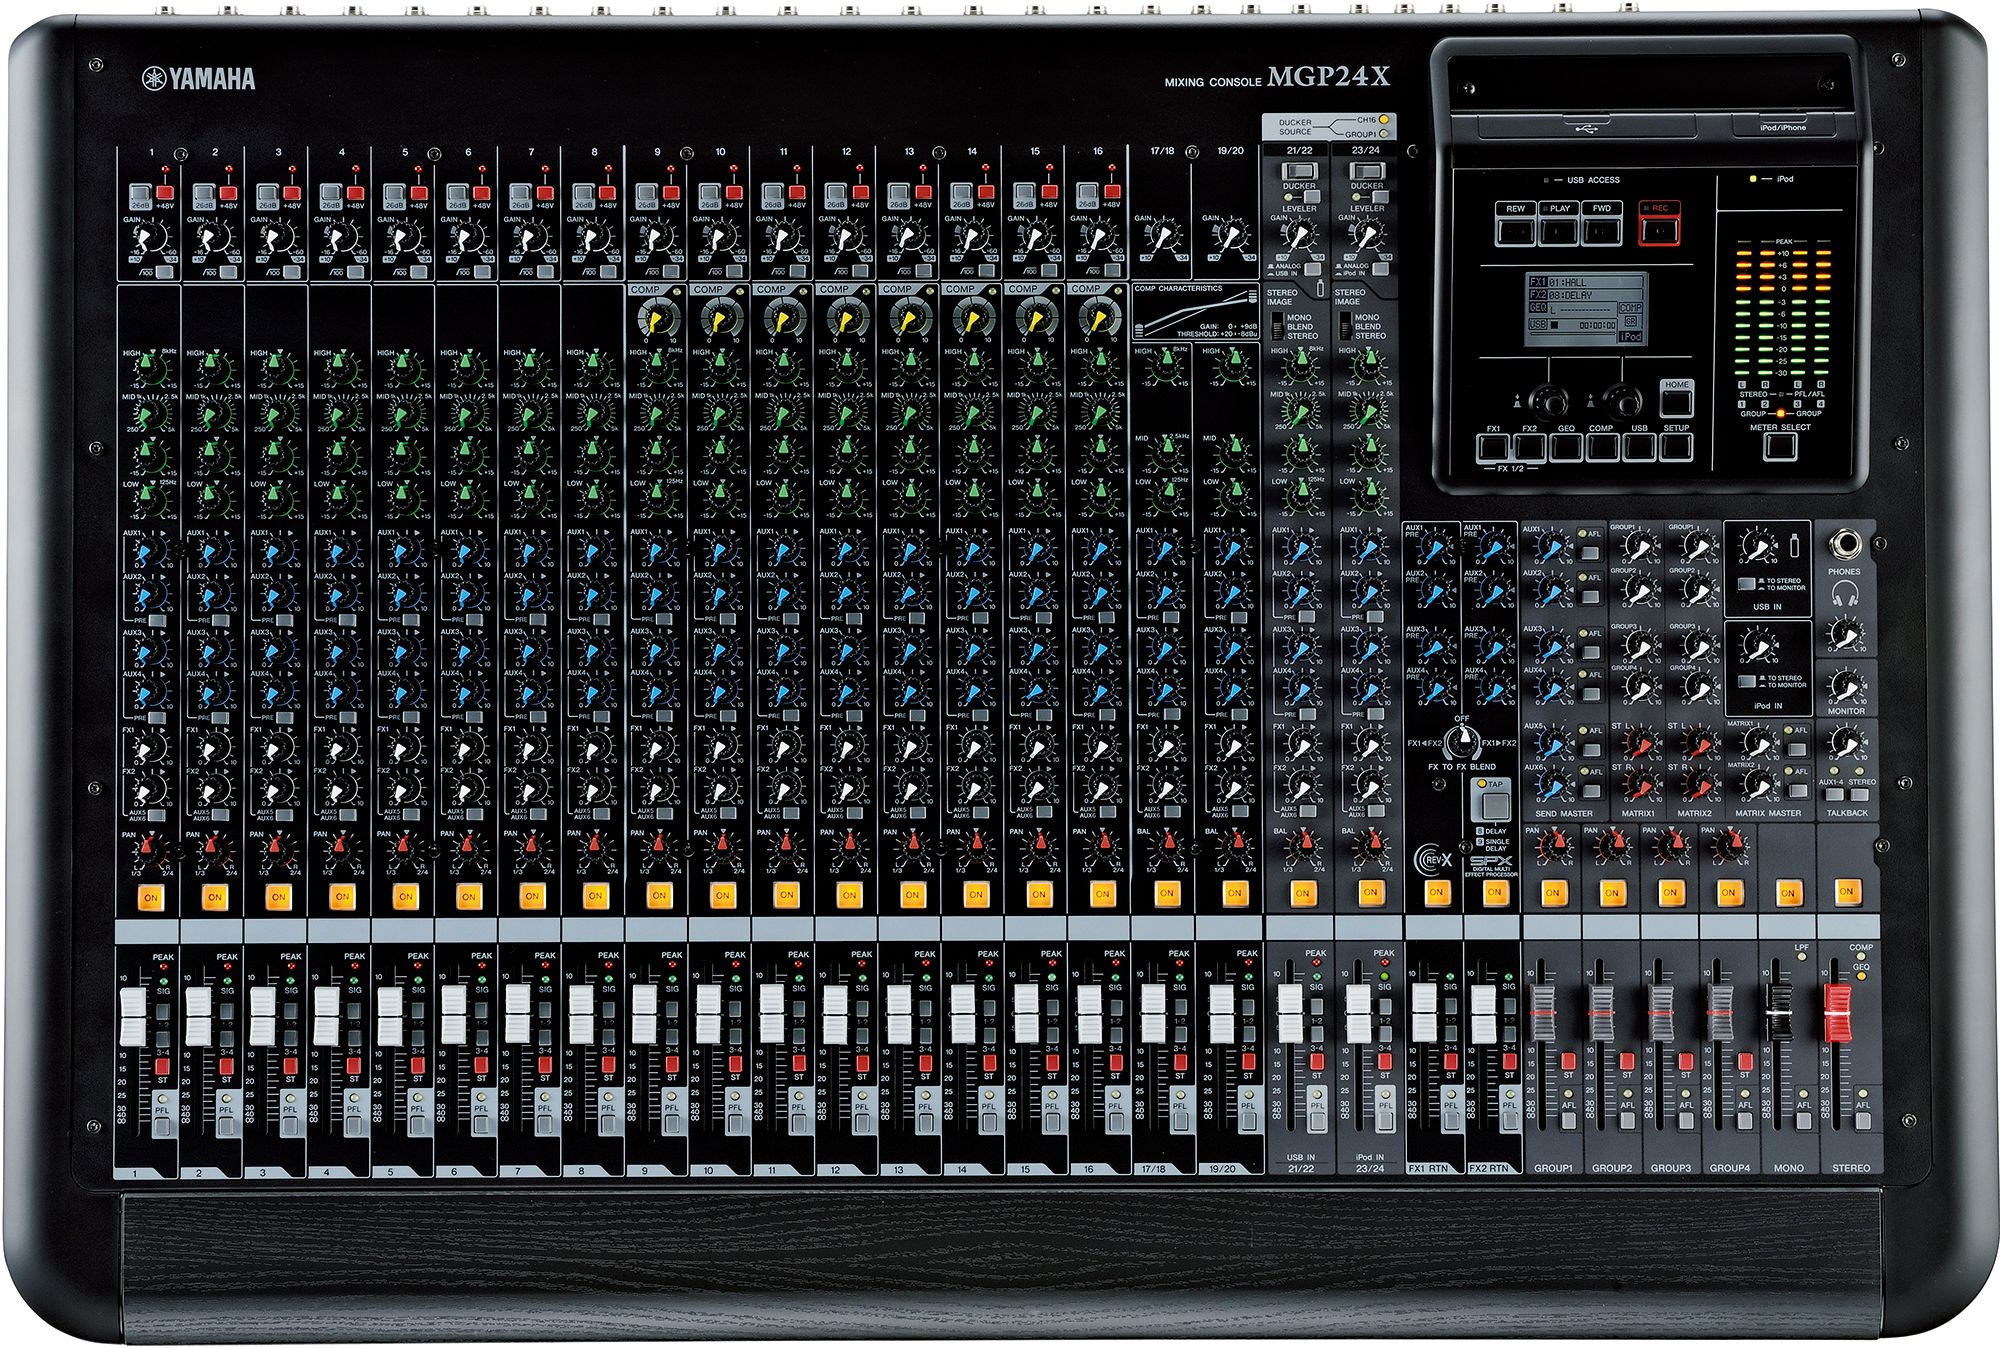 MGP Series - Overview - Mixers - Professional Audio - Products